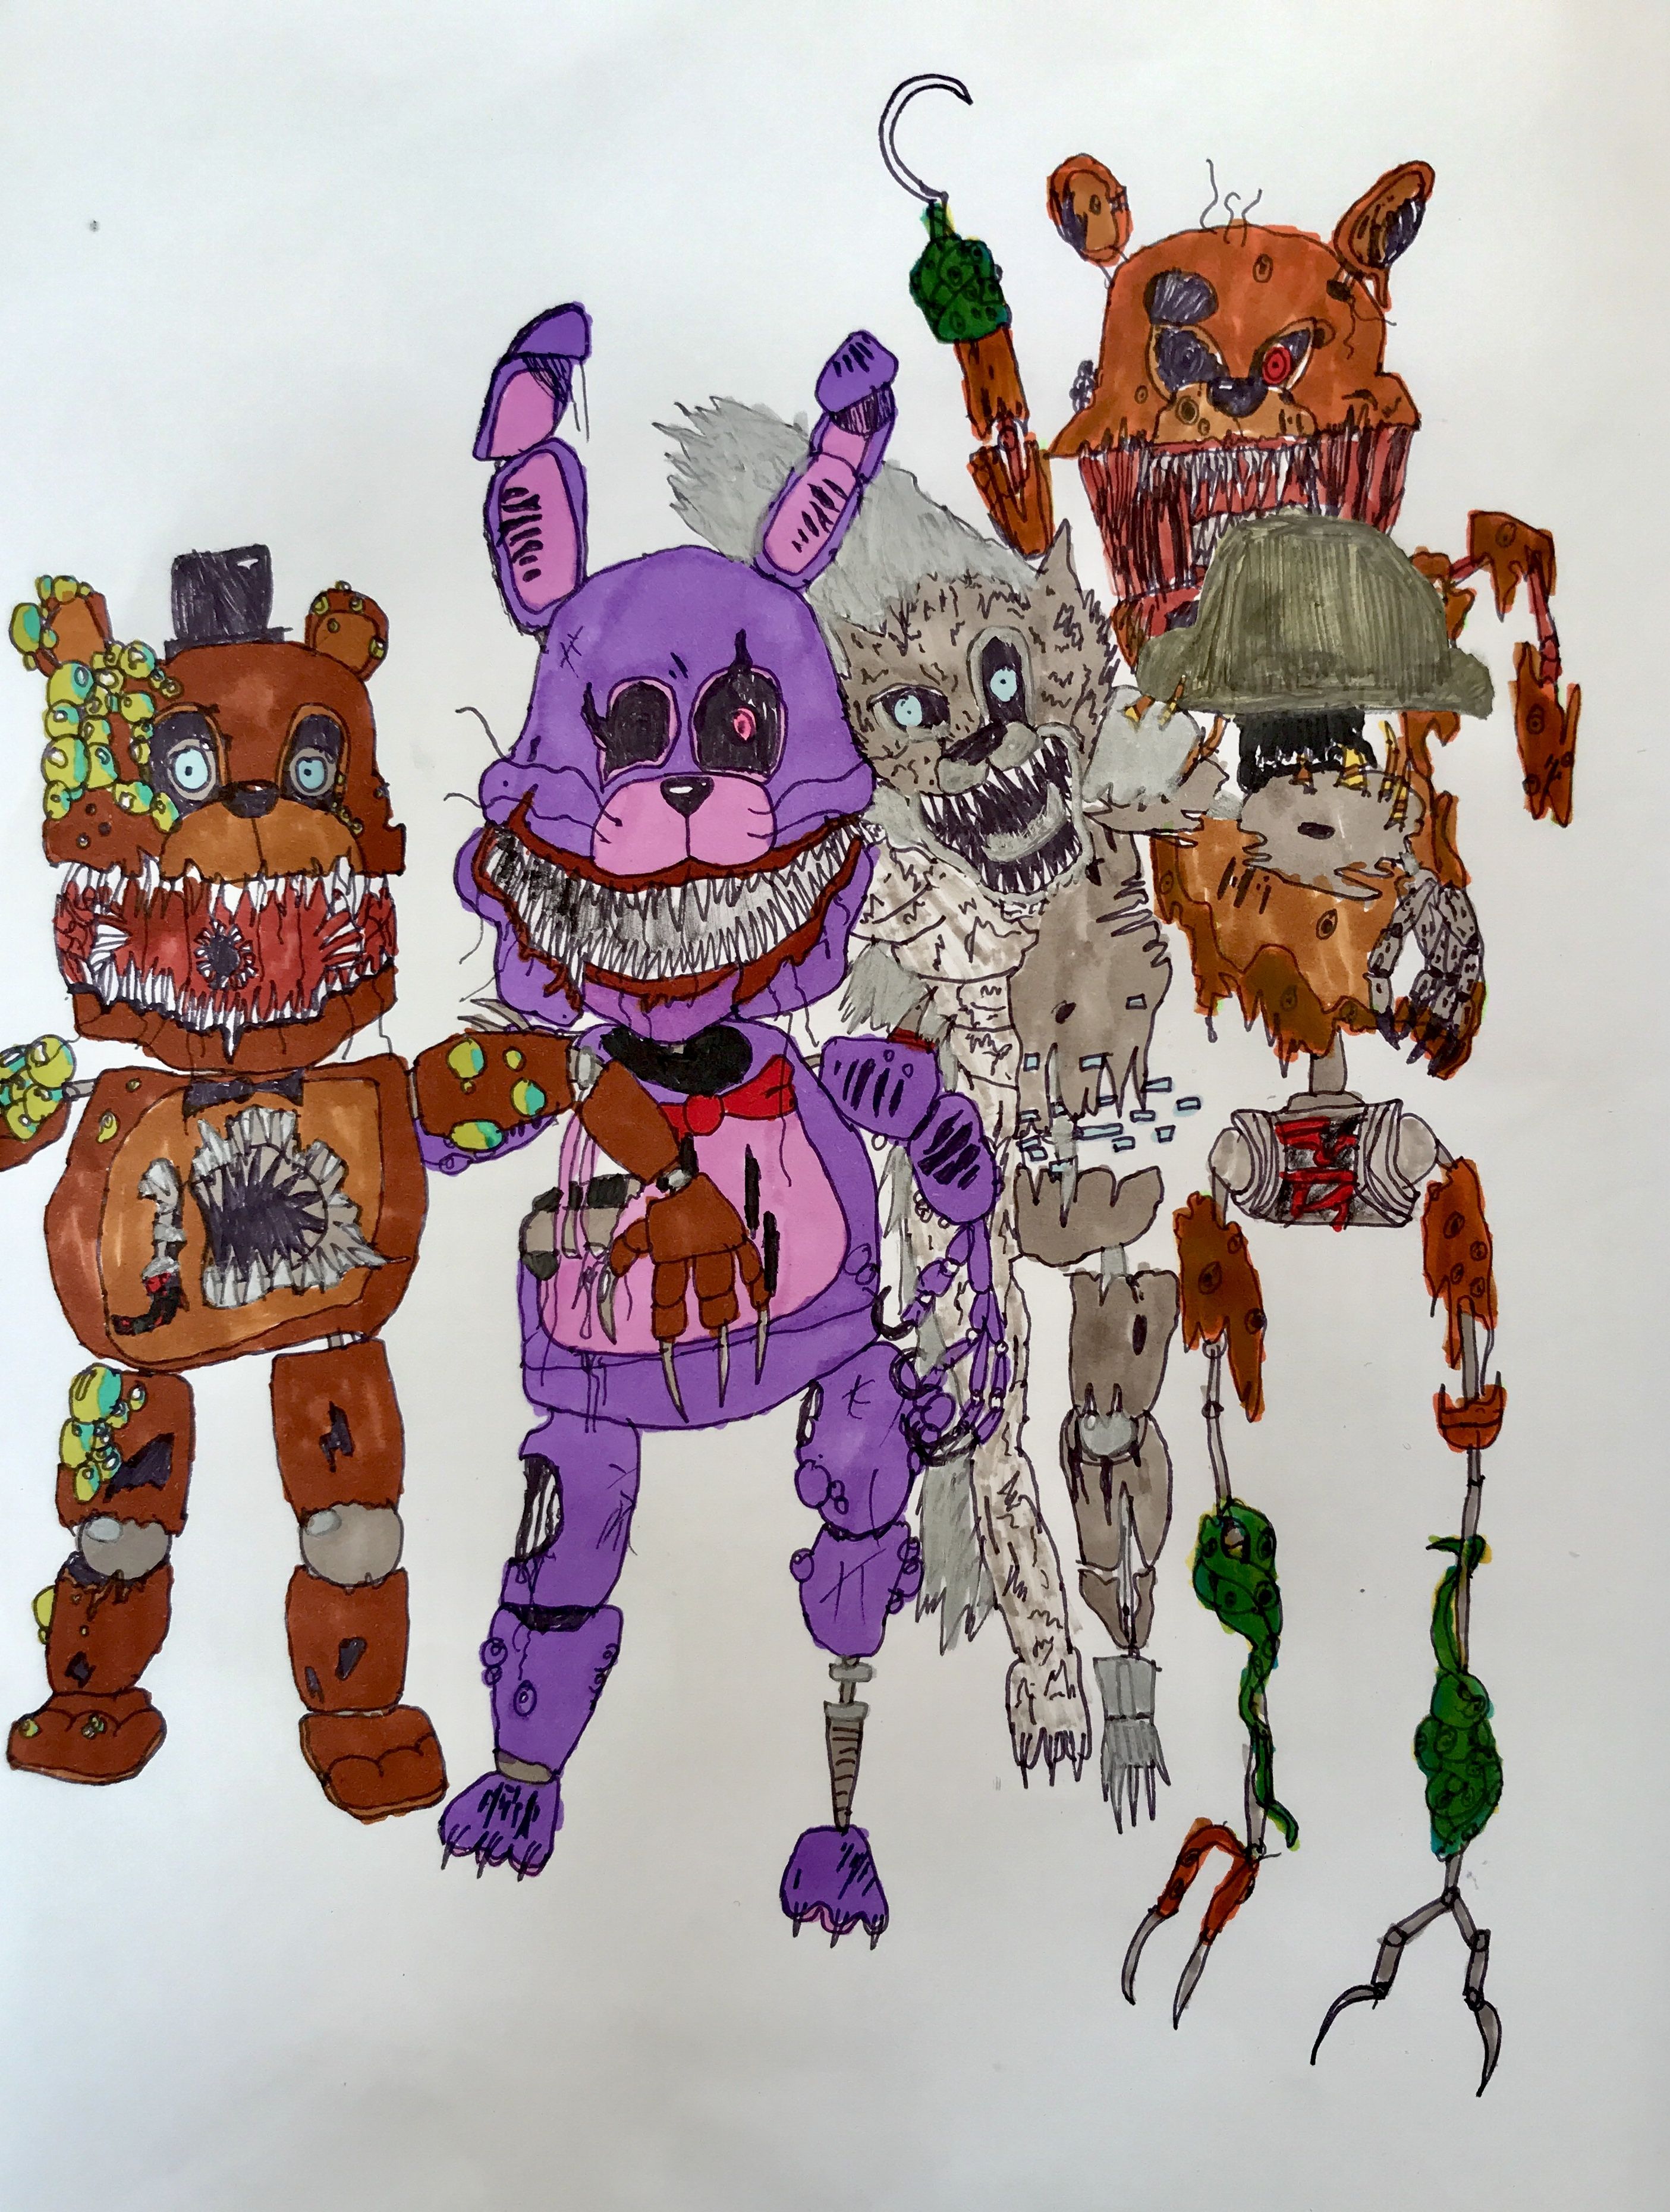 Five Nights At Freddy's: The Twisted Ones Wallpaper